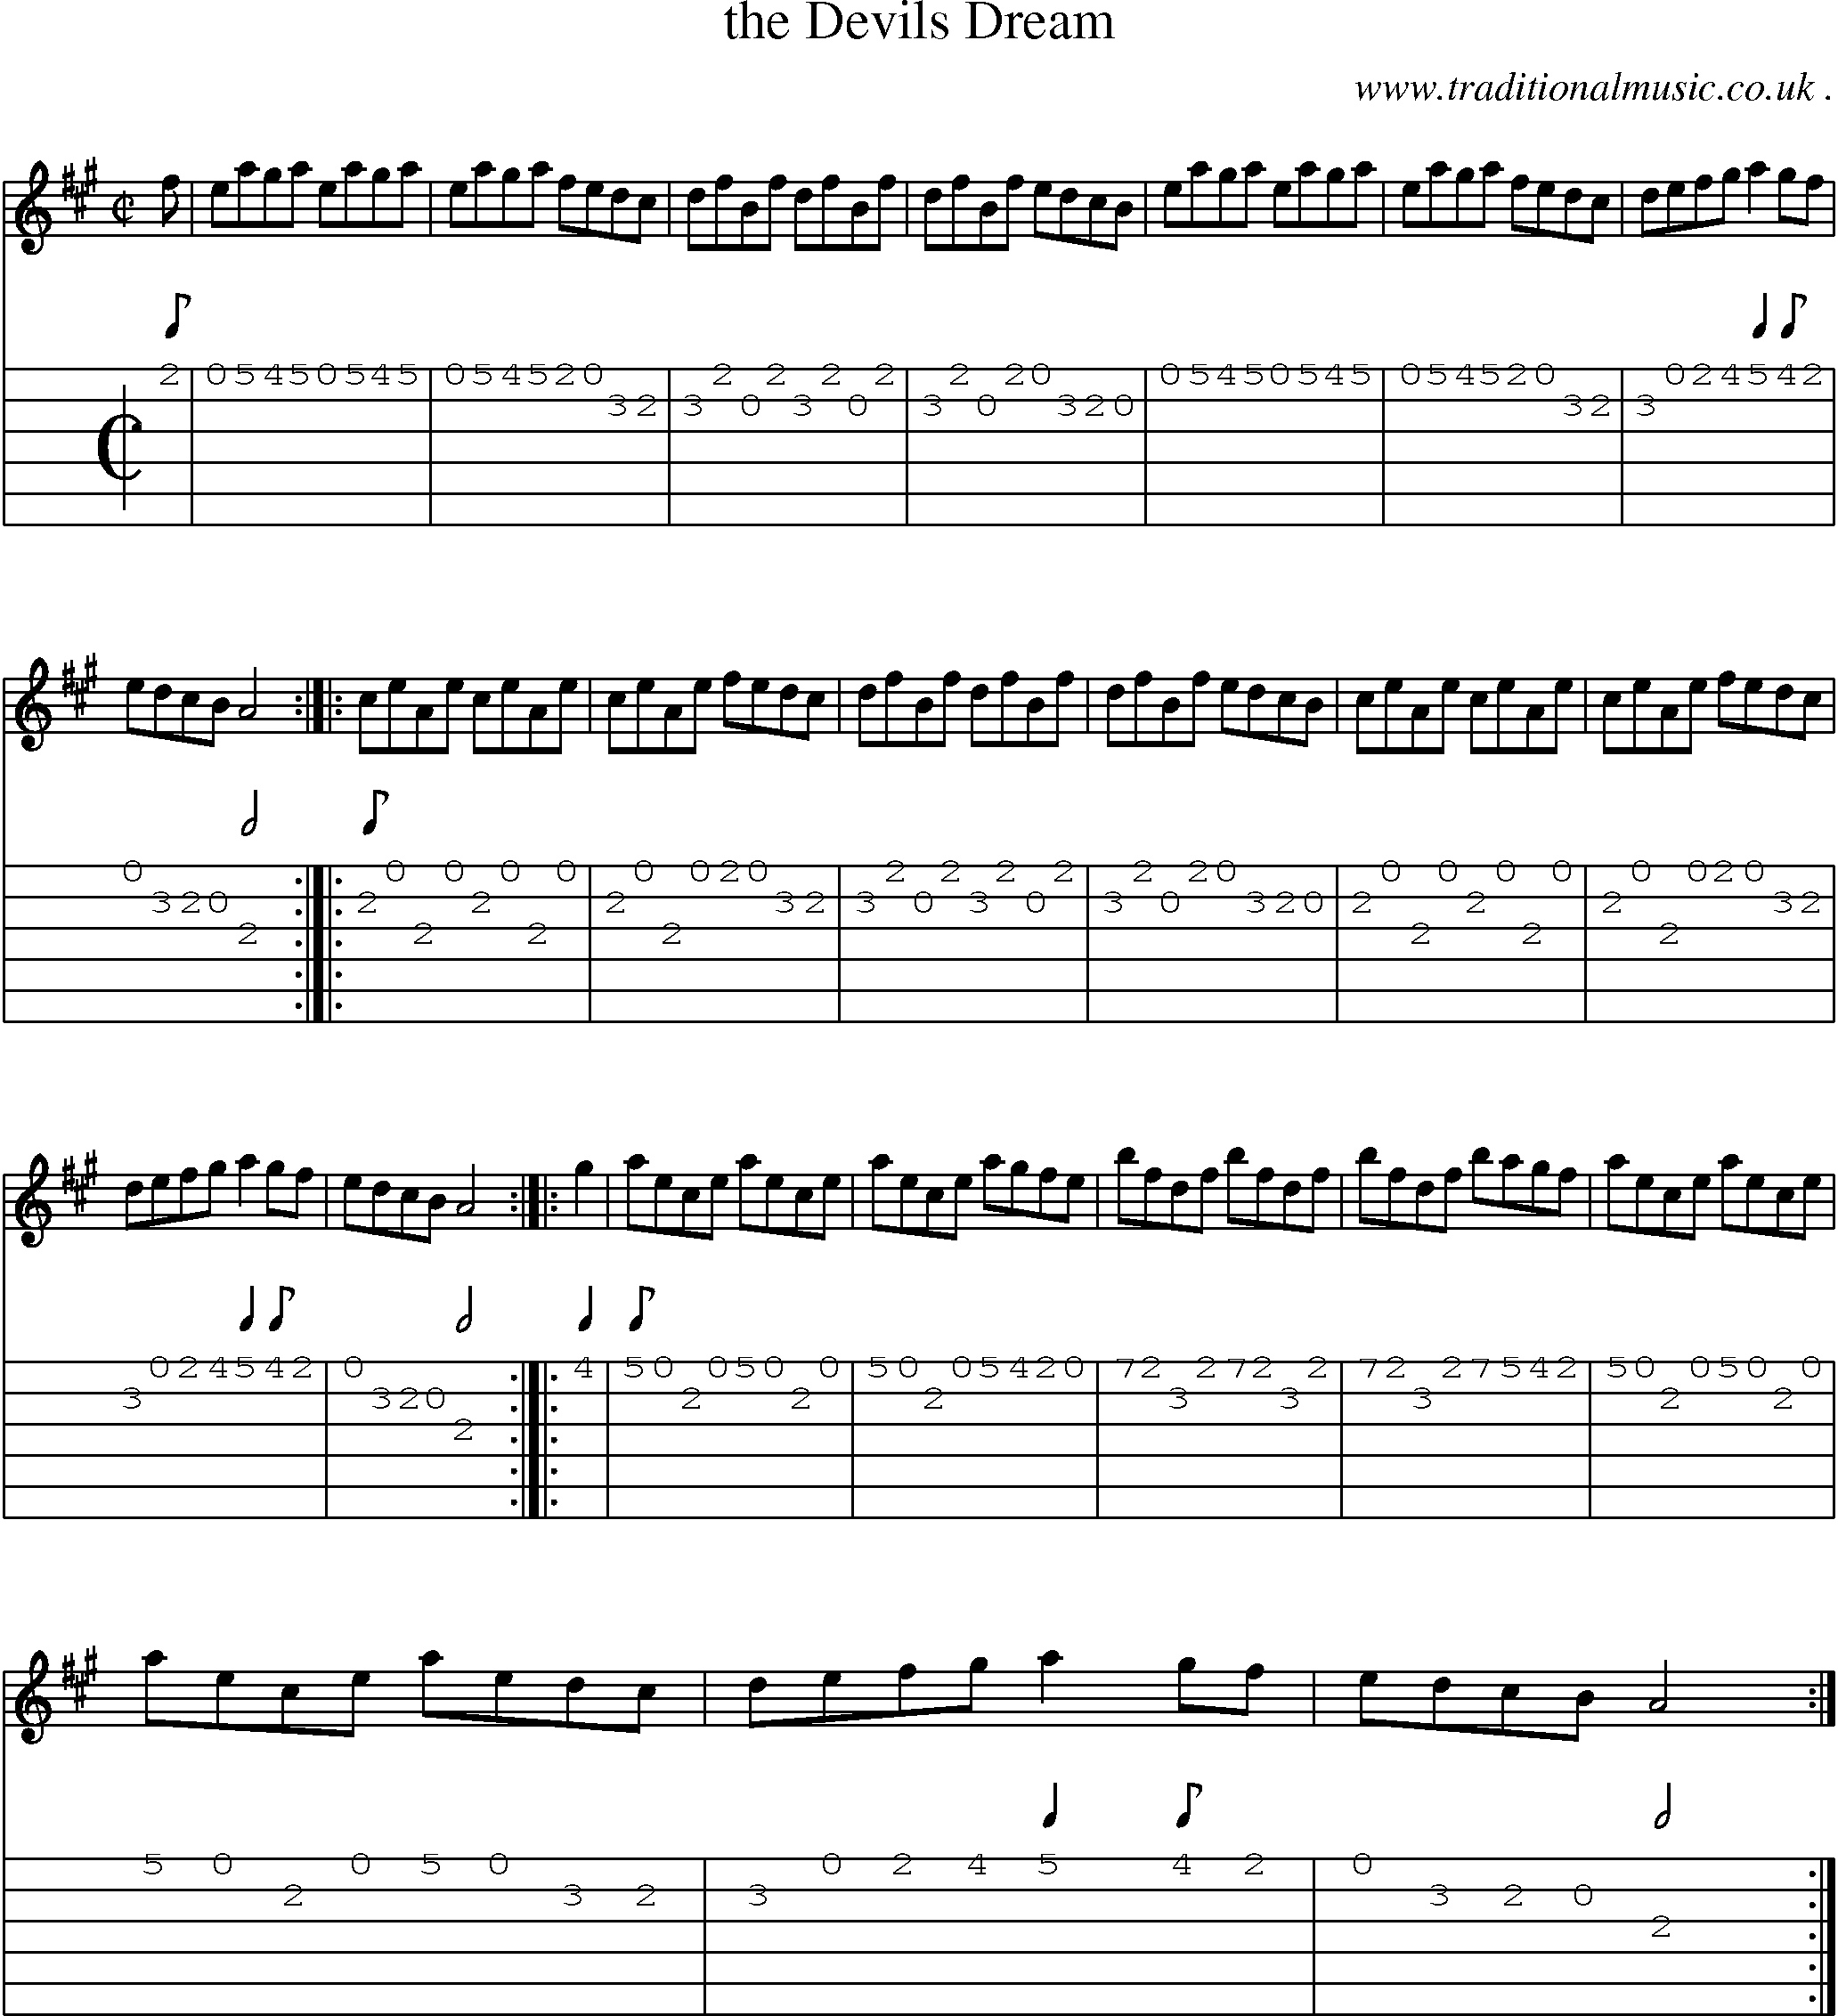 Sheet-Music and Guitar Tabs for The Devils Dream